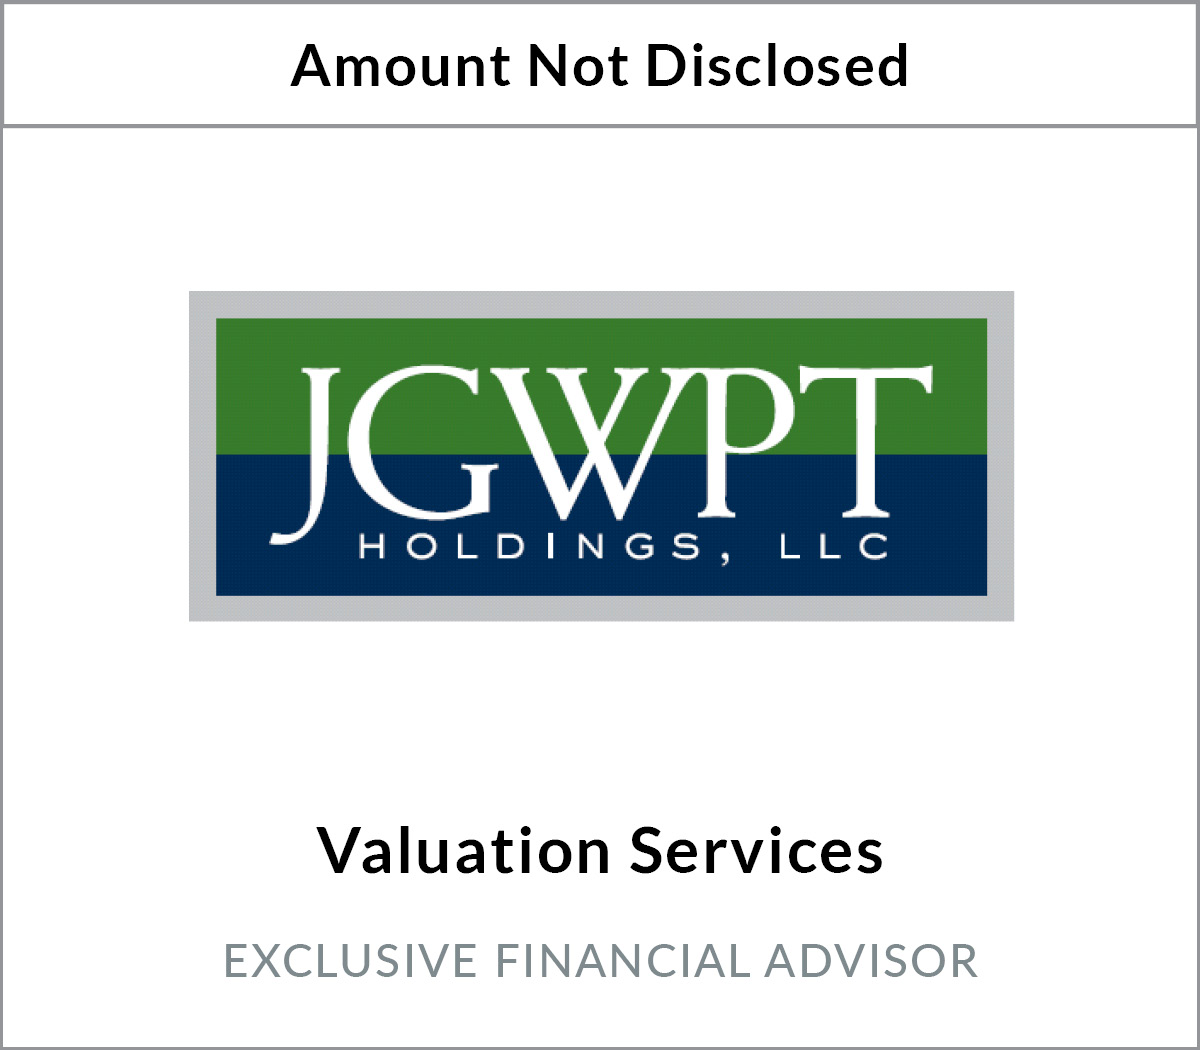 JGWPT Holdings Valuation Services